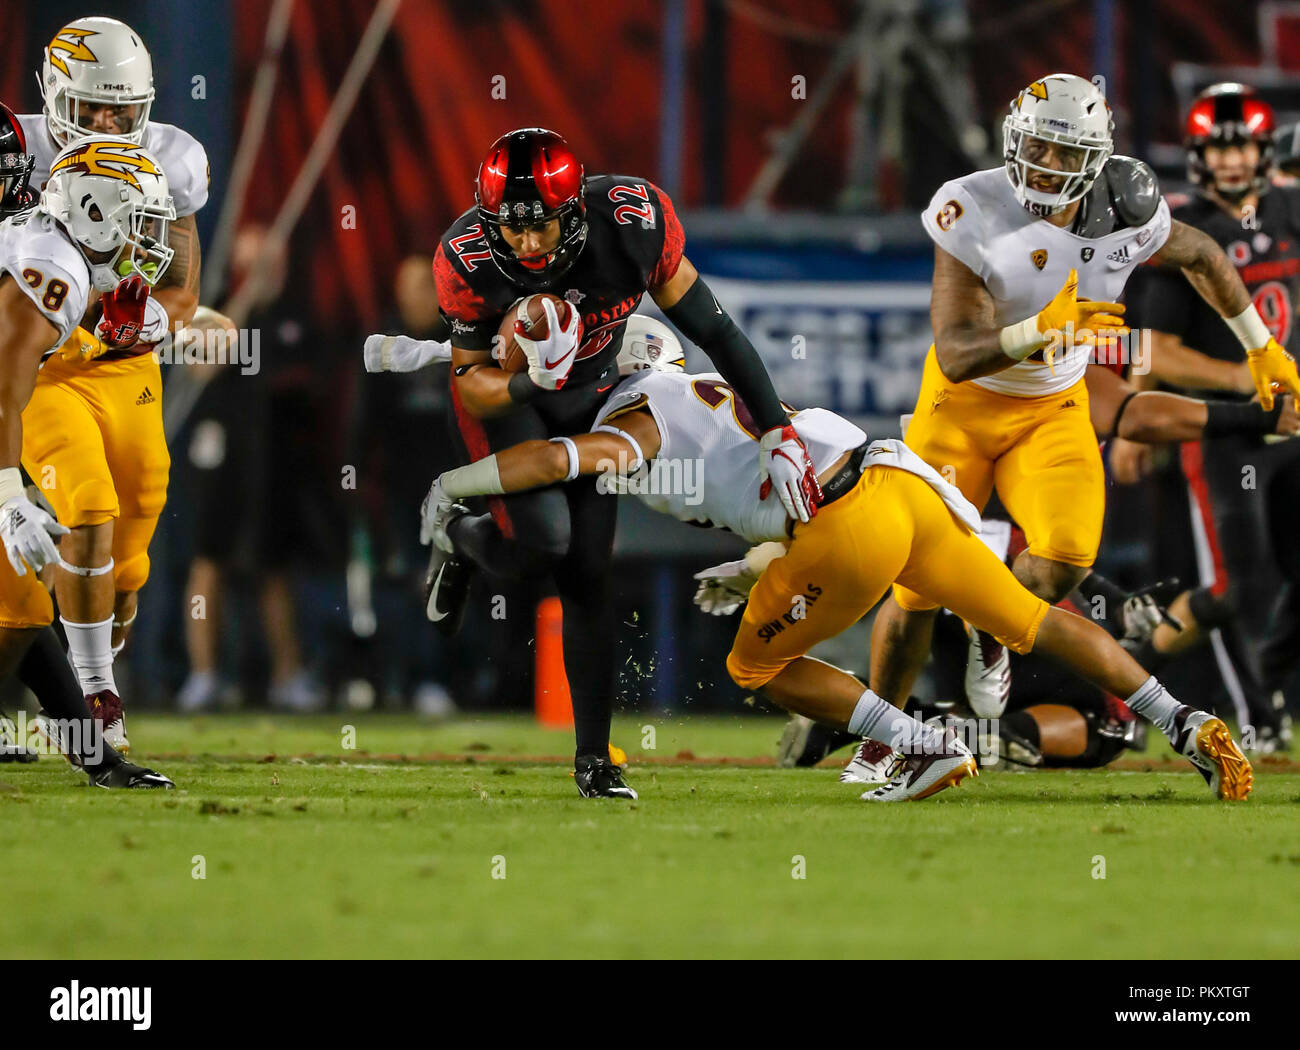 California, USA. September 15, 2018 :San Diego State Aztecs running back Chase Jasmin (22) takes the ball for a short gain against the Arizona State Sun Devils at SDCCU Stadium in San Diego, California. Michael Cazares/Cal Sport Media Credit: Cal Sport Media/Alamy Live News Stock Photo